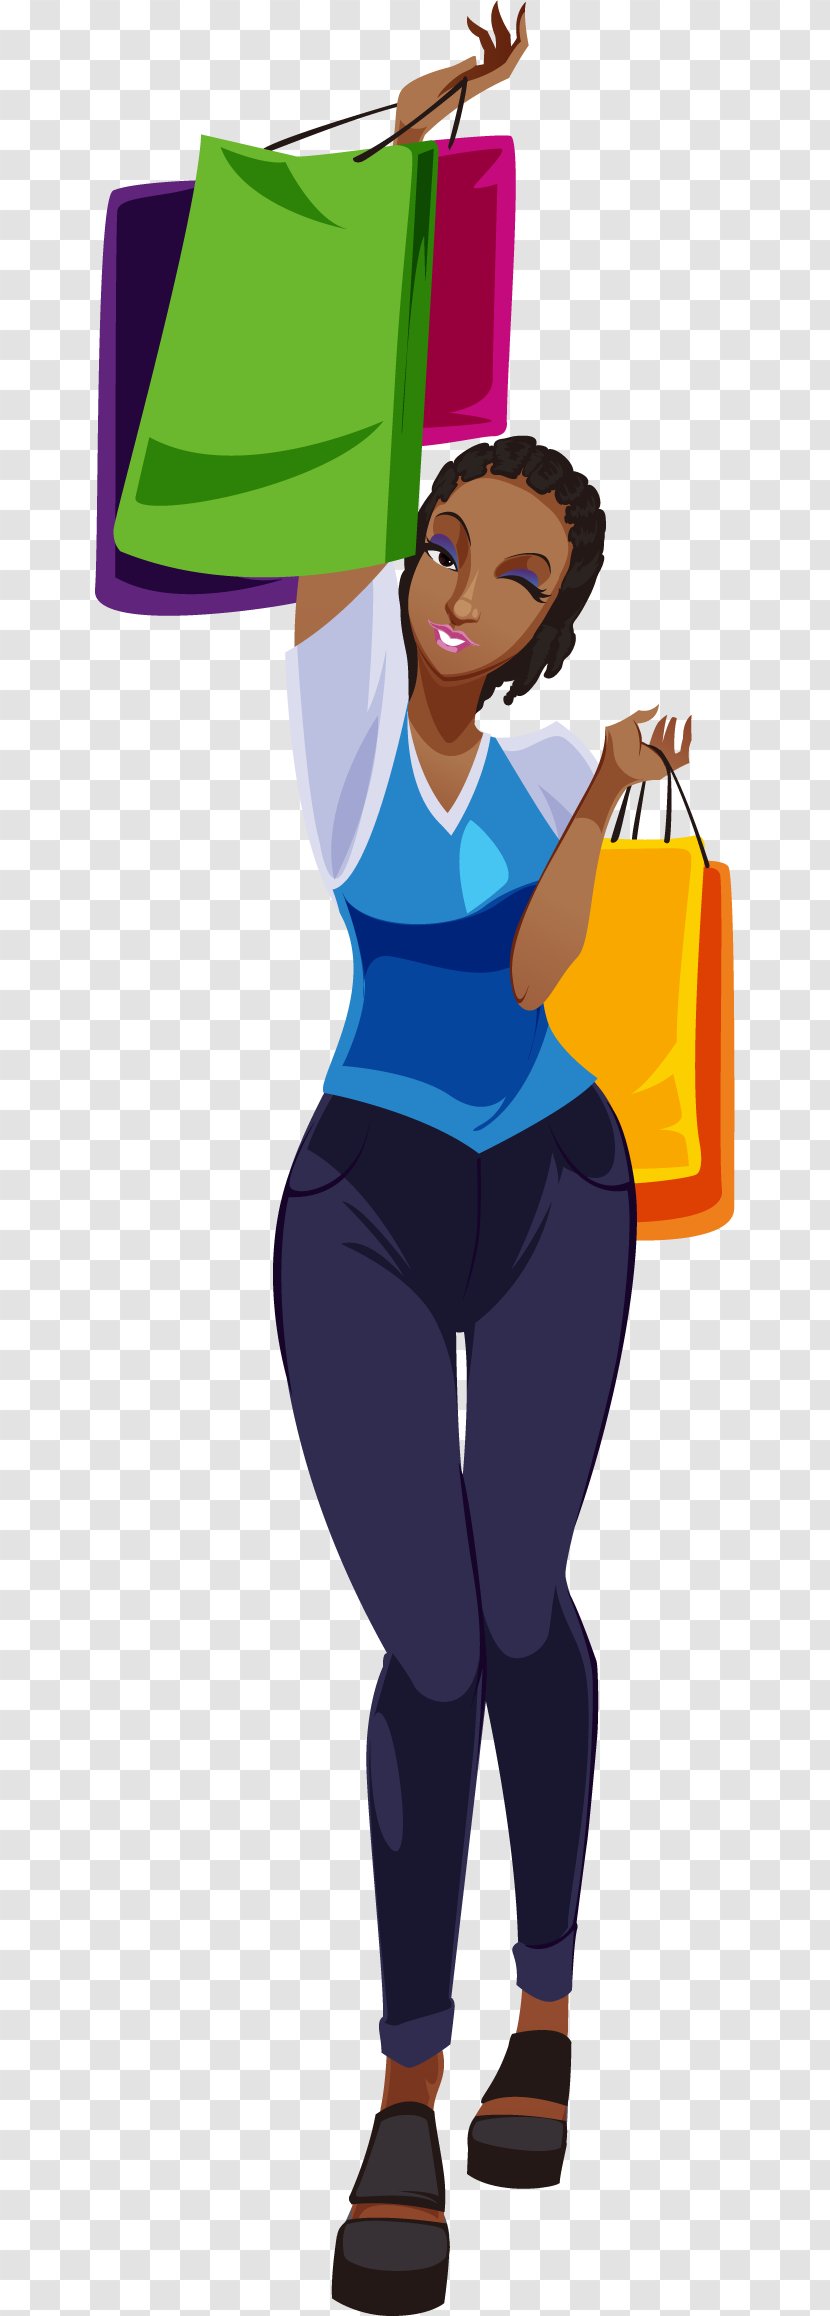 Shopping Consumer - Silhouette - Exalted Bag Woman Transparent PNG